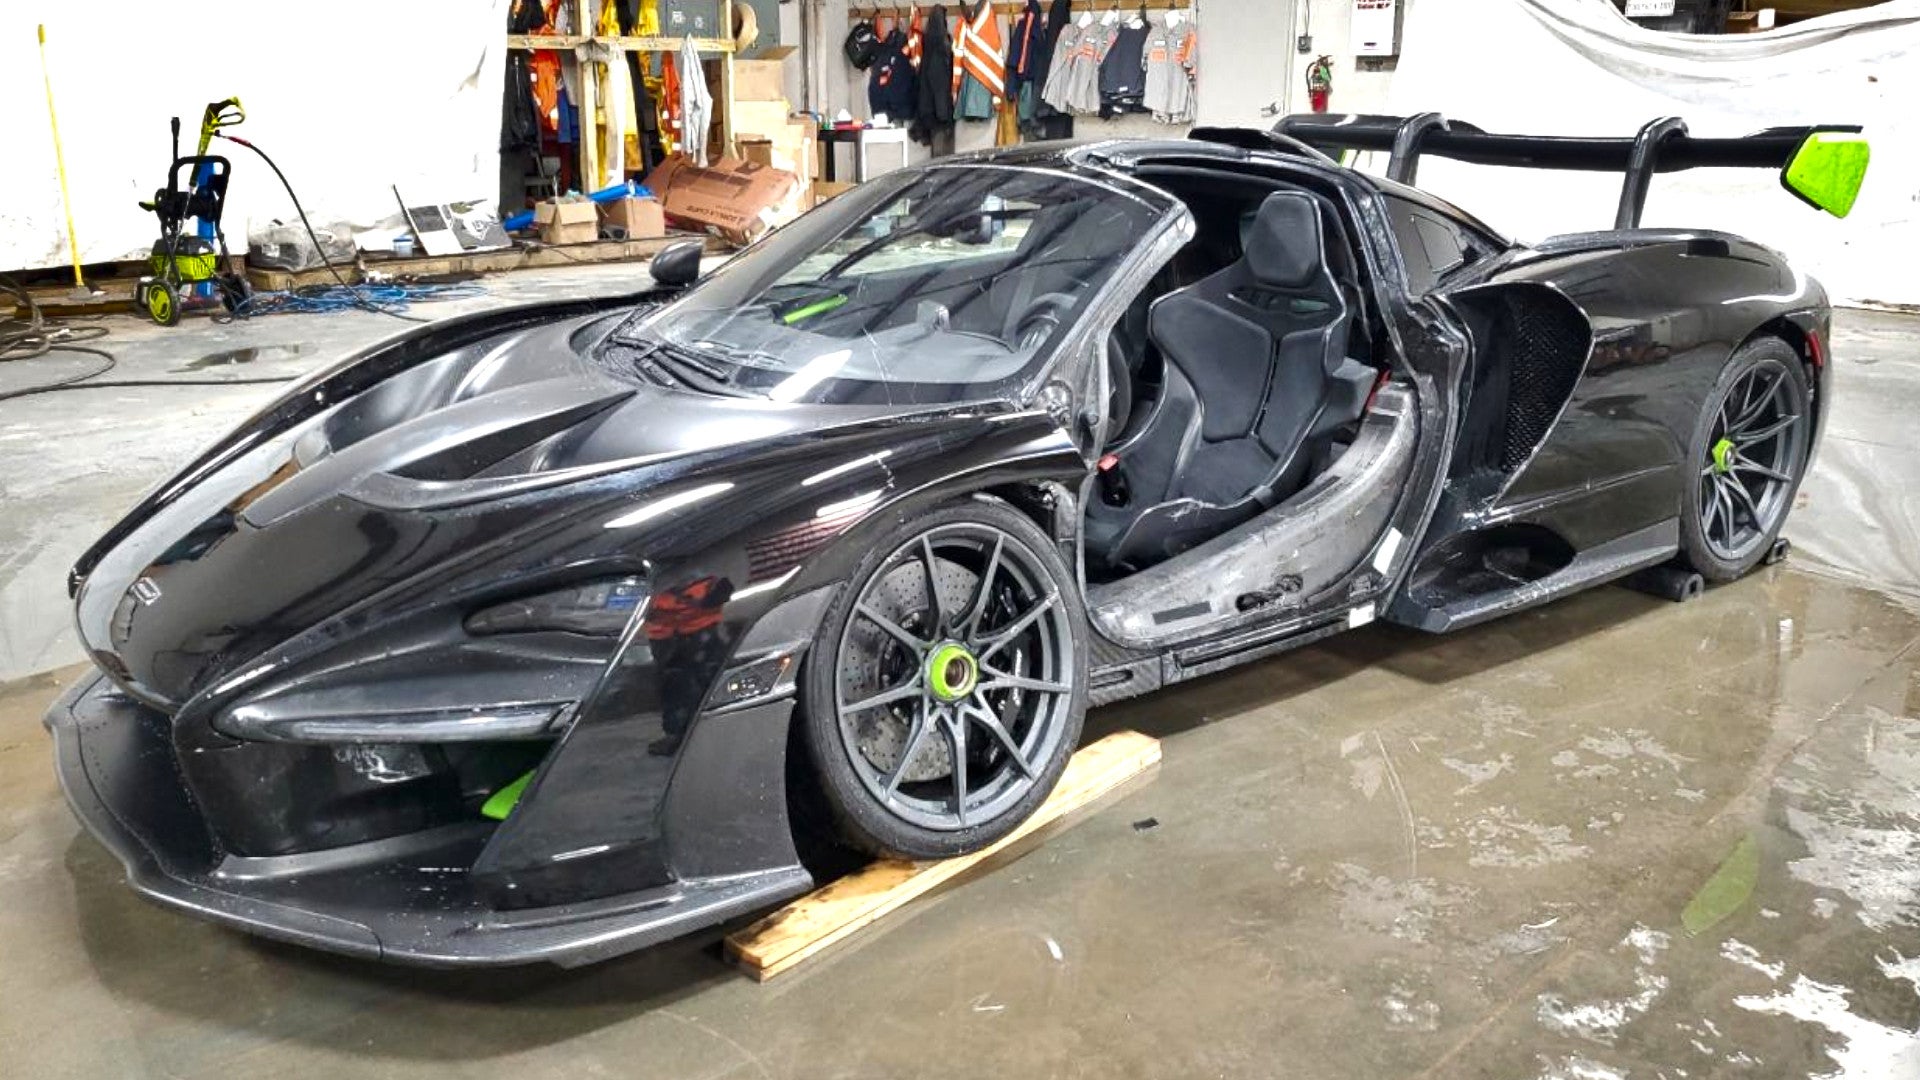 Buy This Totaled McLaren Senna on Copart If Six-Figure Project Cars Don’t Scare You